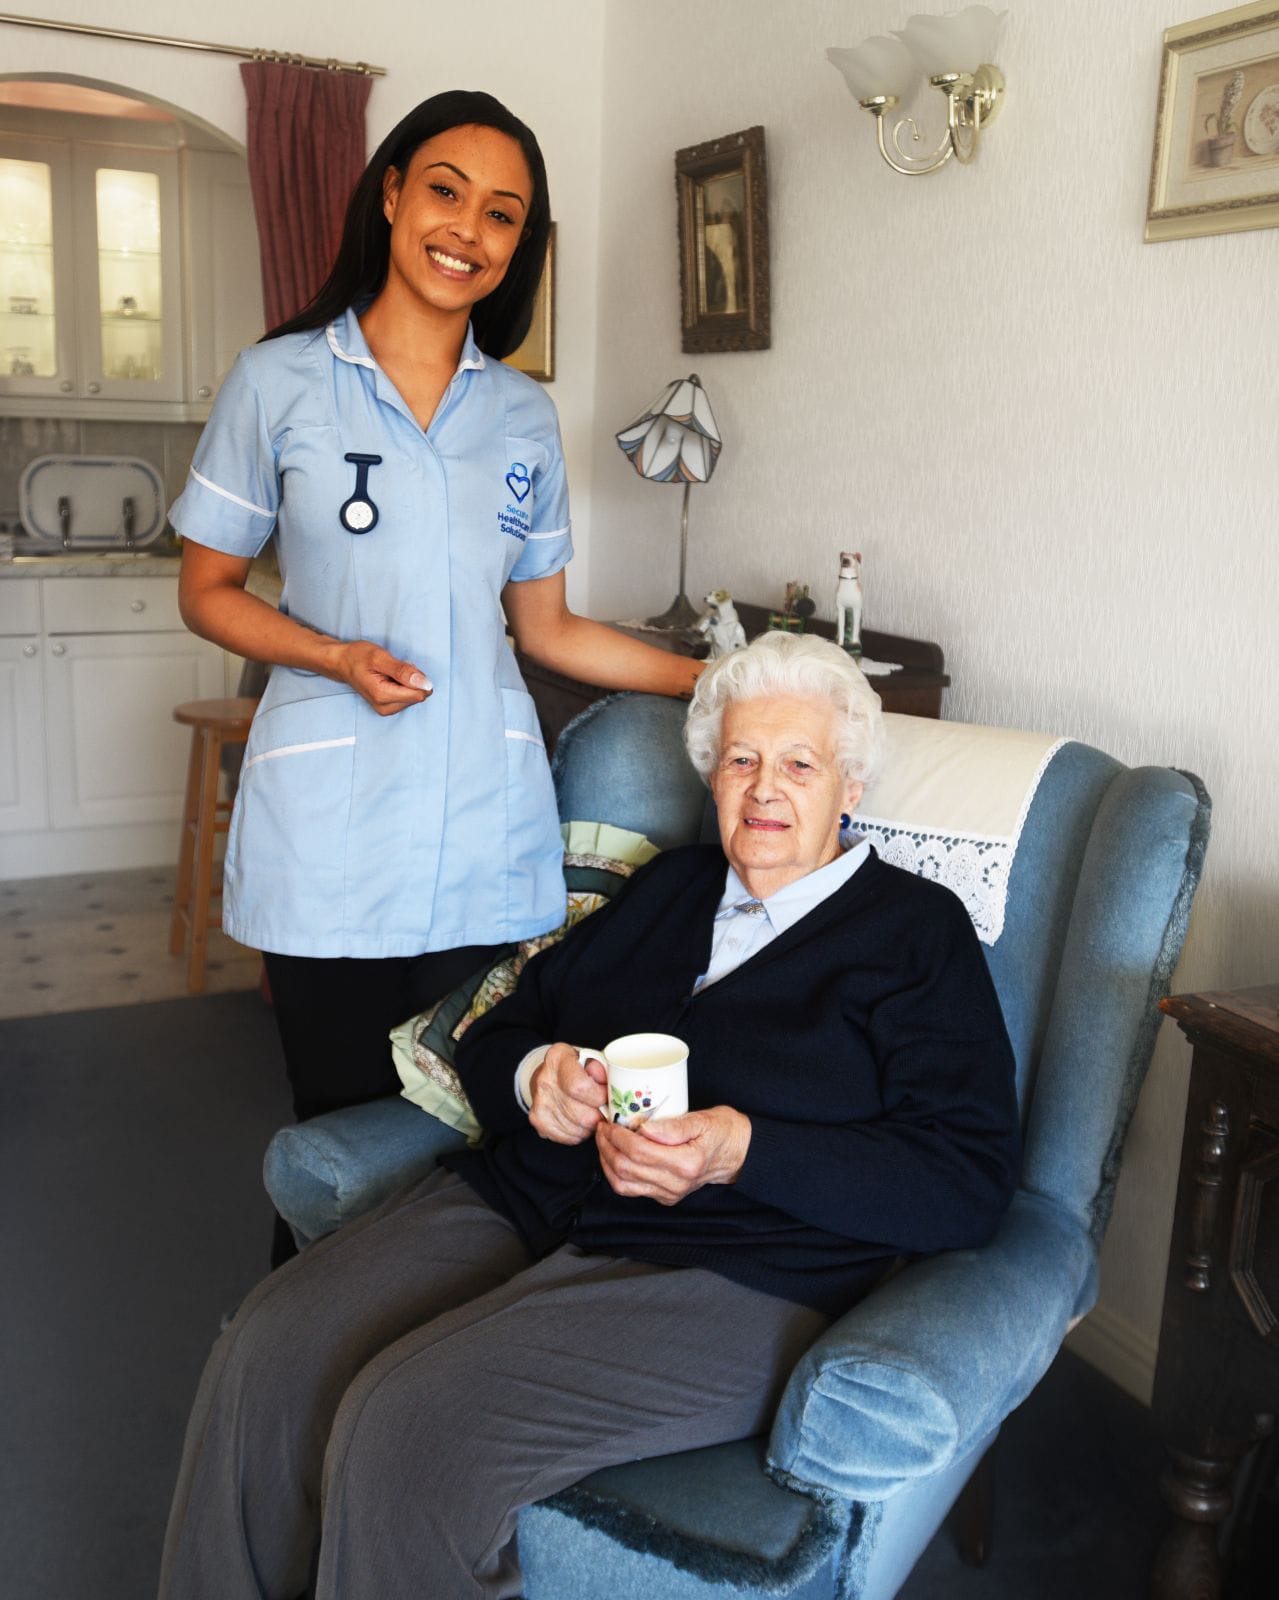 Domiciliary Care Services And what We Have To Offer: